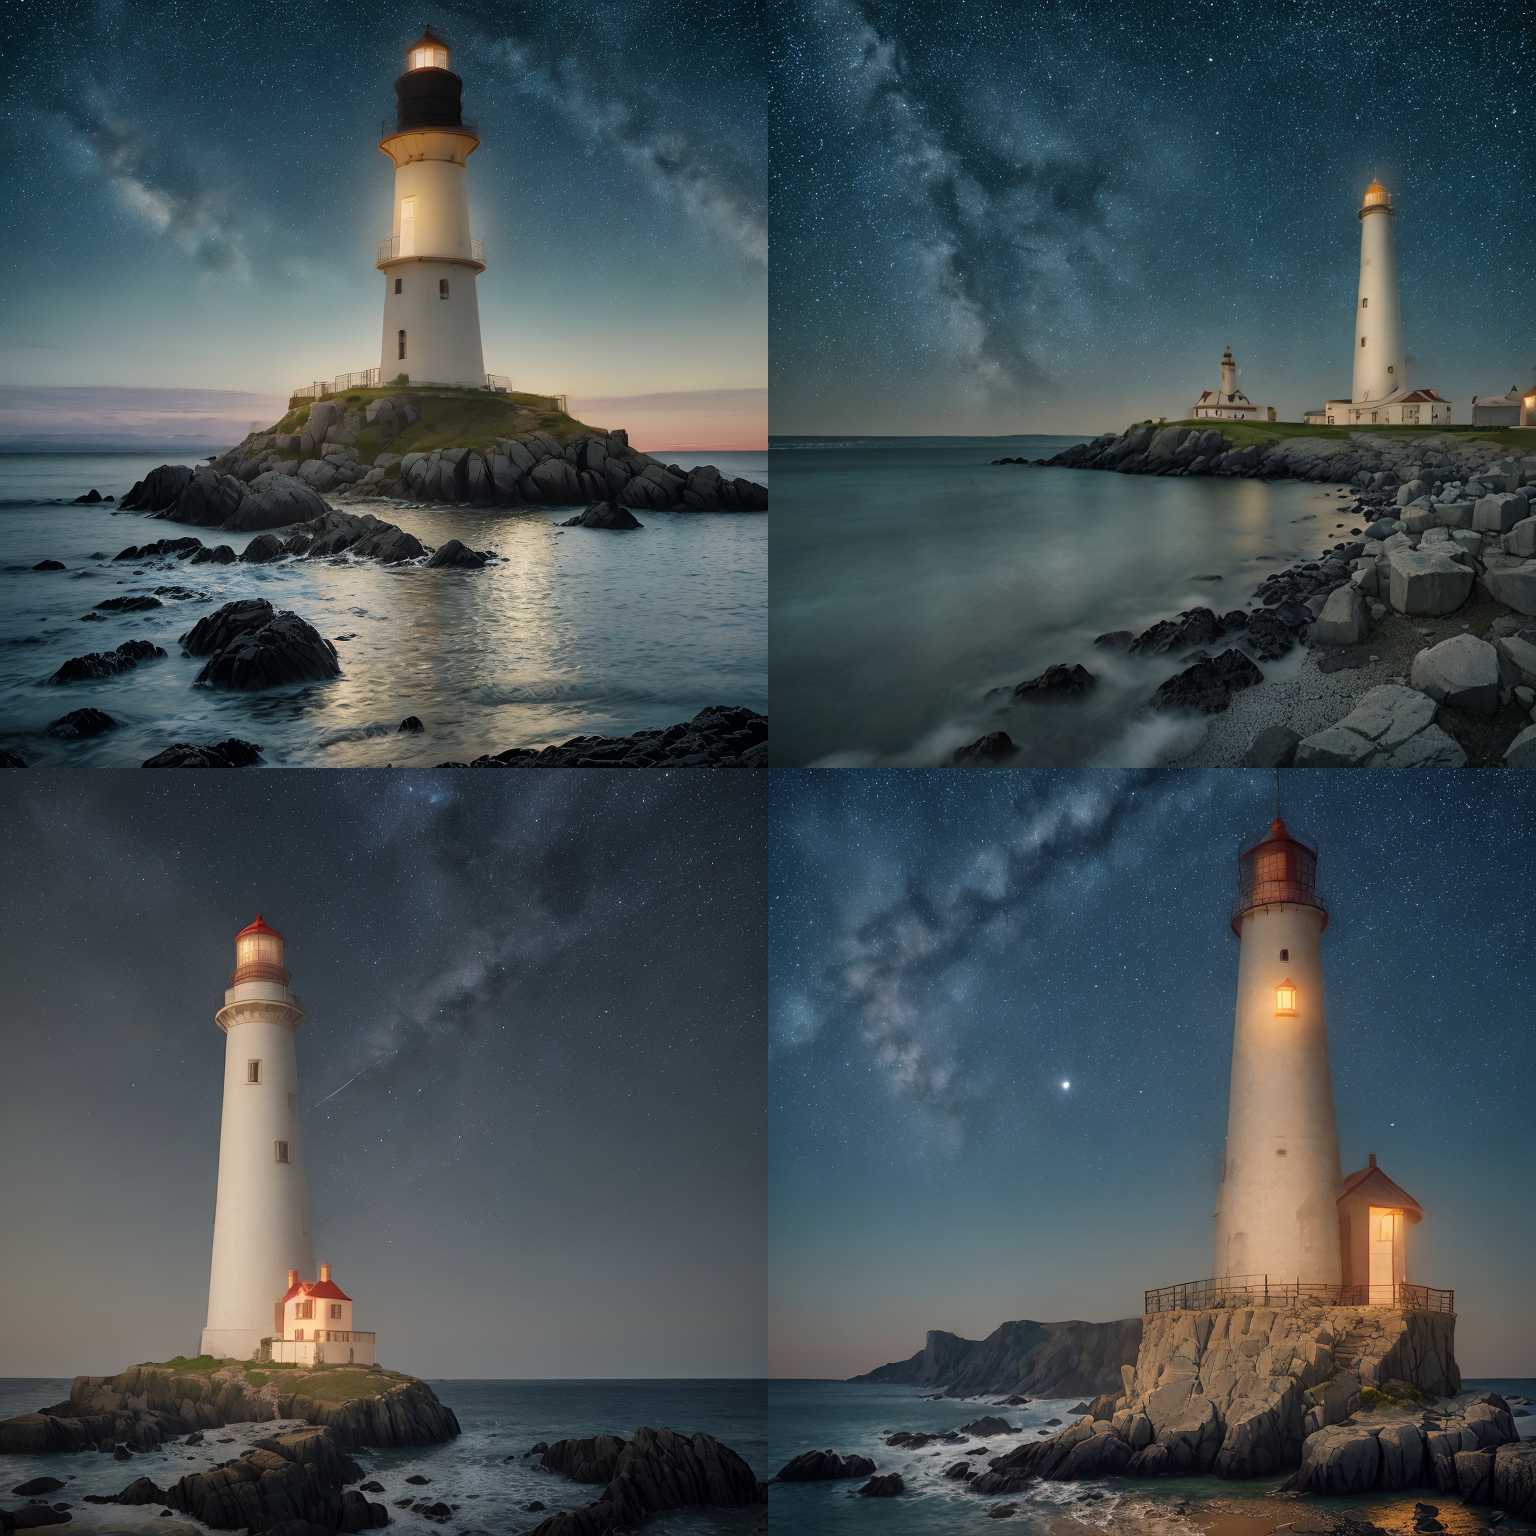 A lighthouse during nighttime